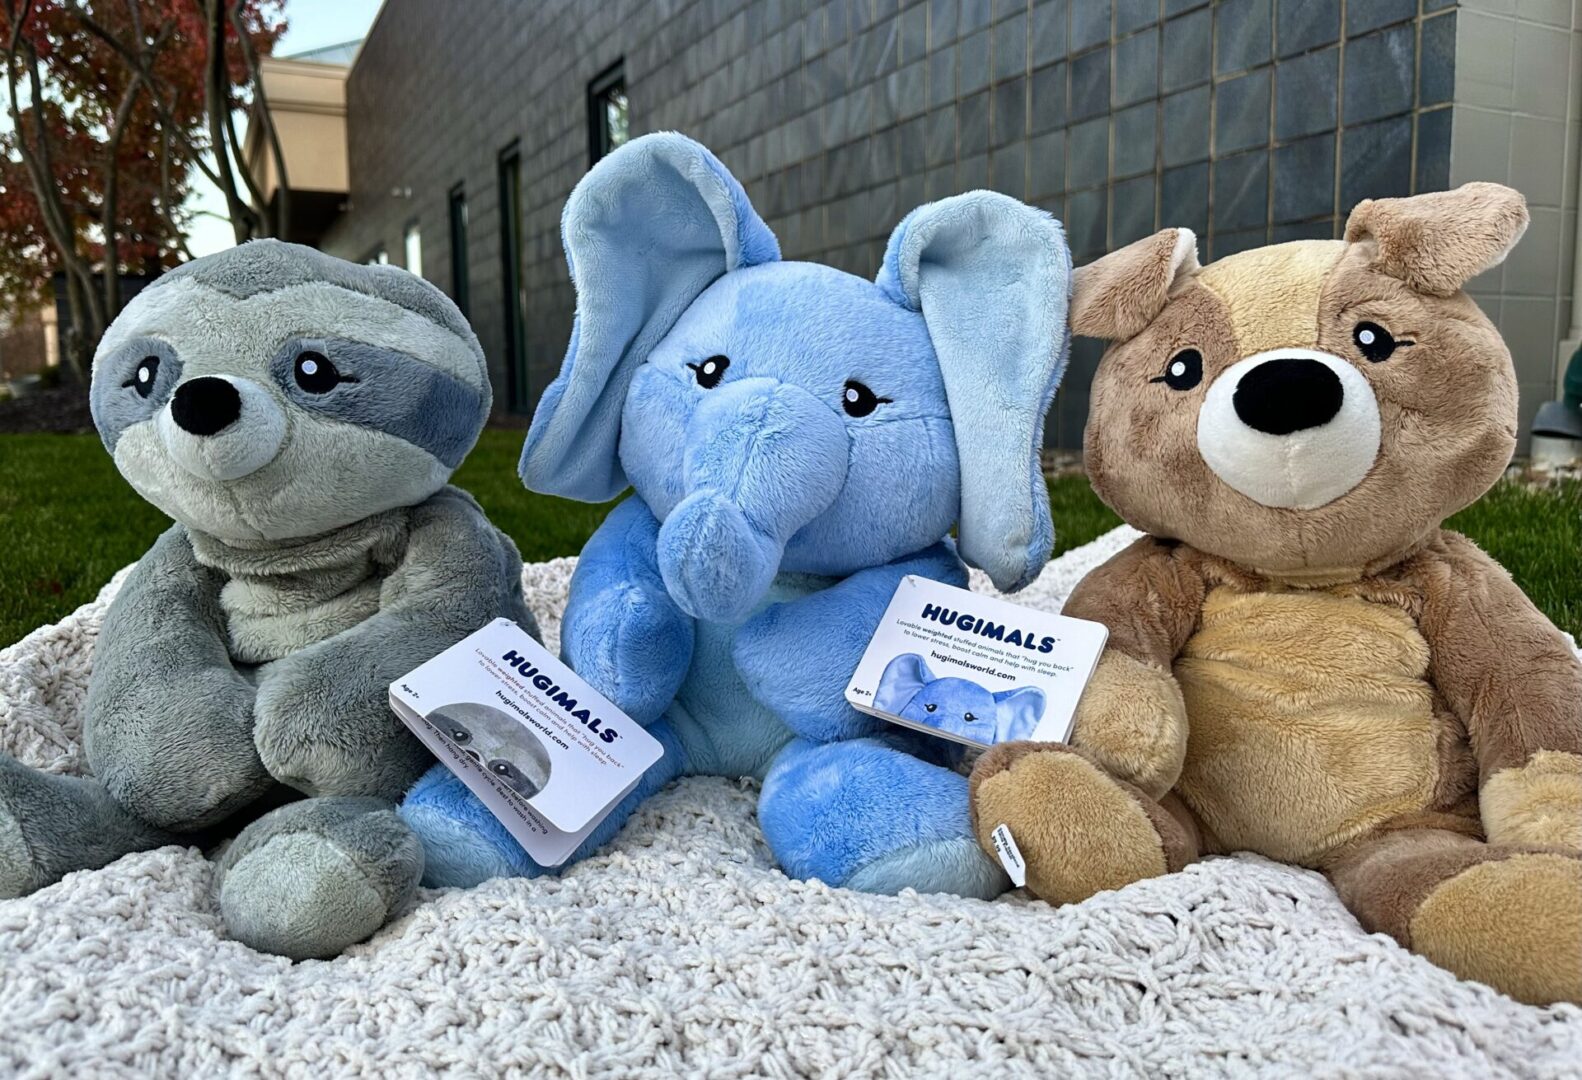 Three Hugimals sitting on a blanket in front of a building.